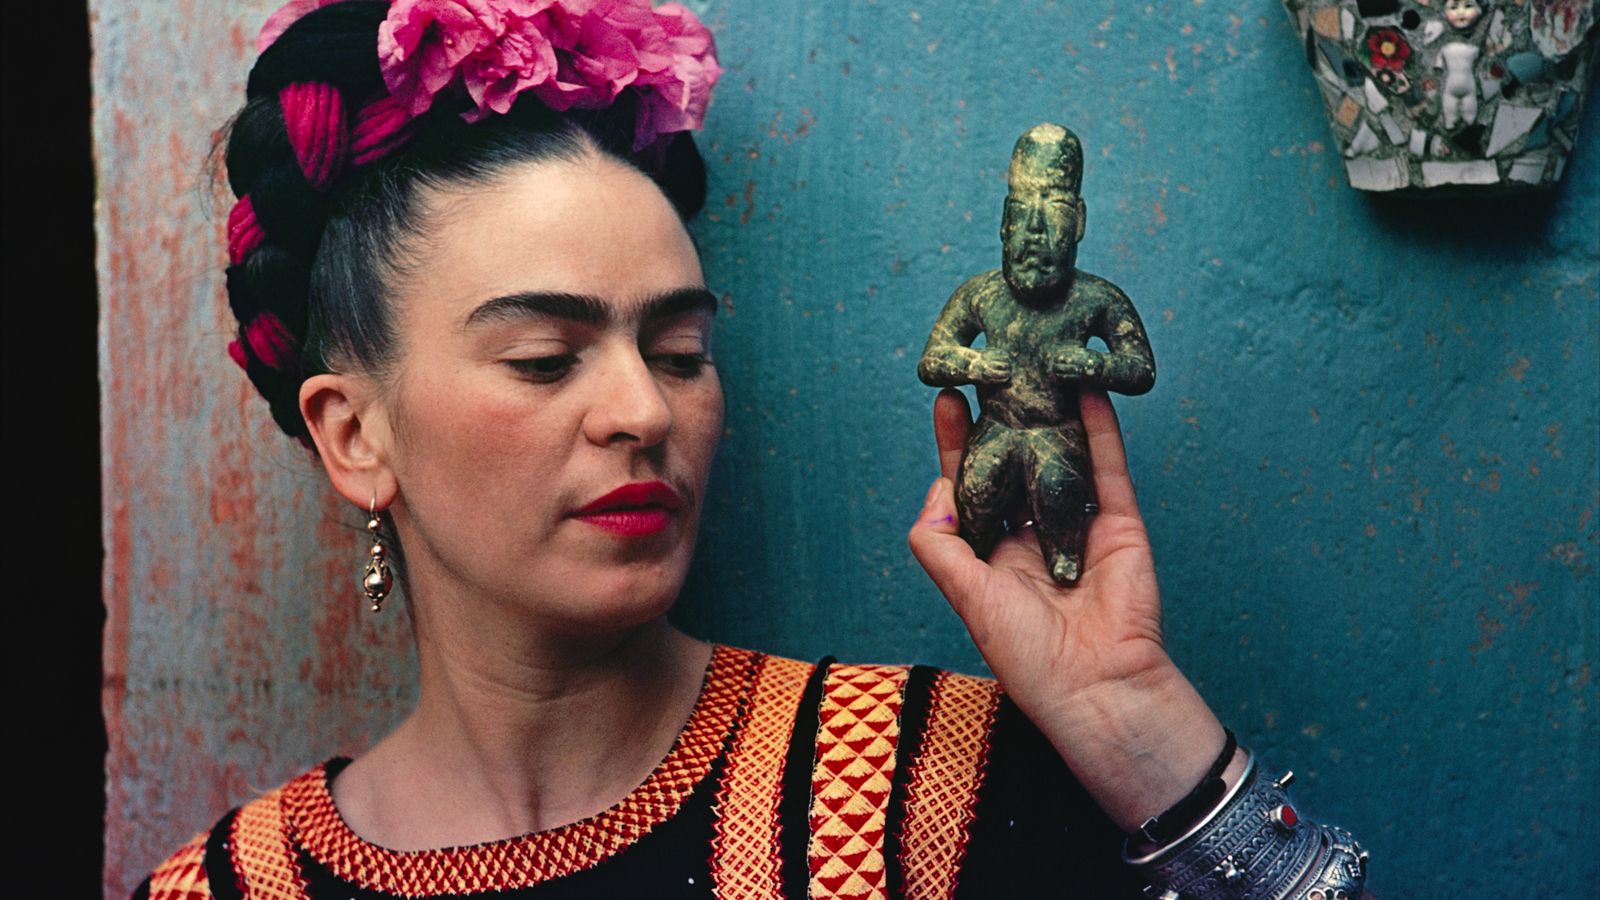 Frida Kahlo: the Mexican artist who used fashion to make a powerful political statement